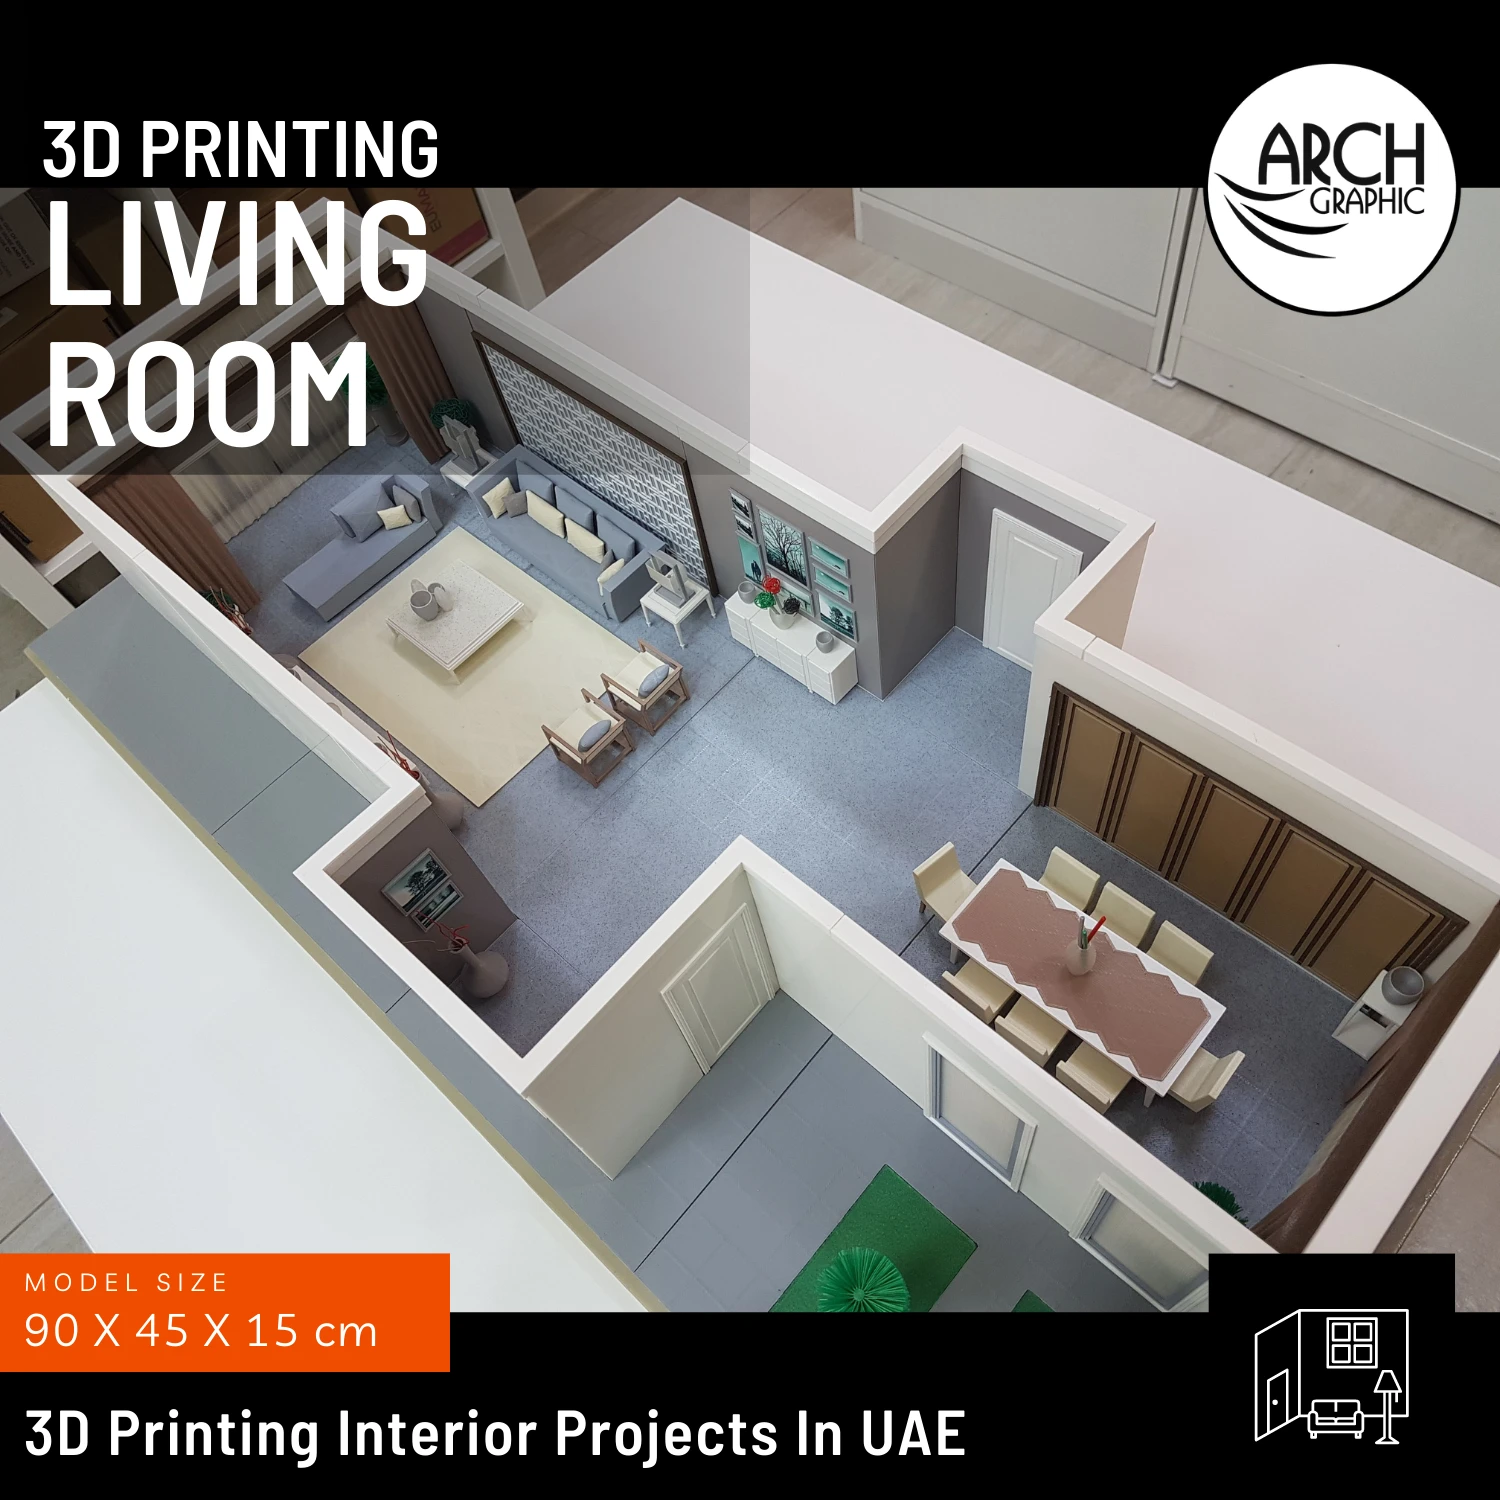 ARCH GRAPHIC 3D Printing in UAE on LinkedIn: HOME